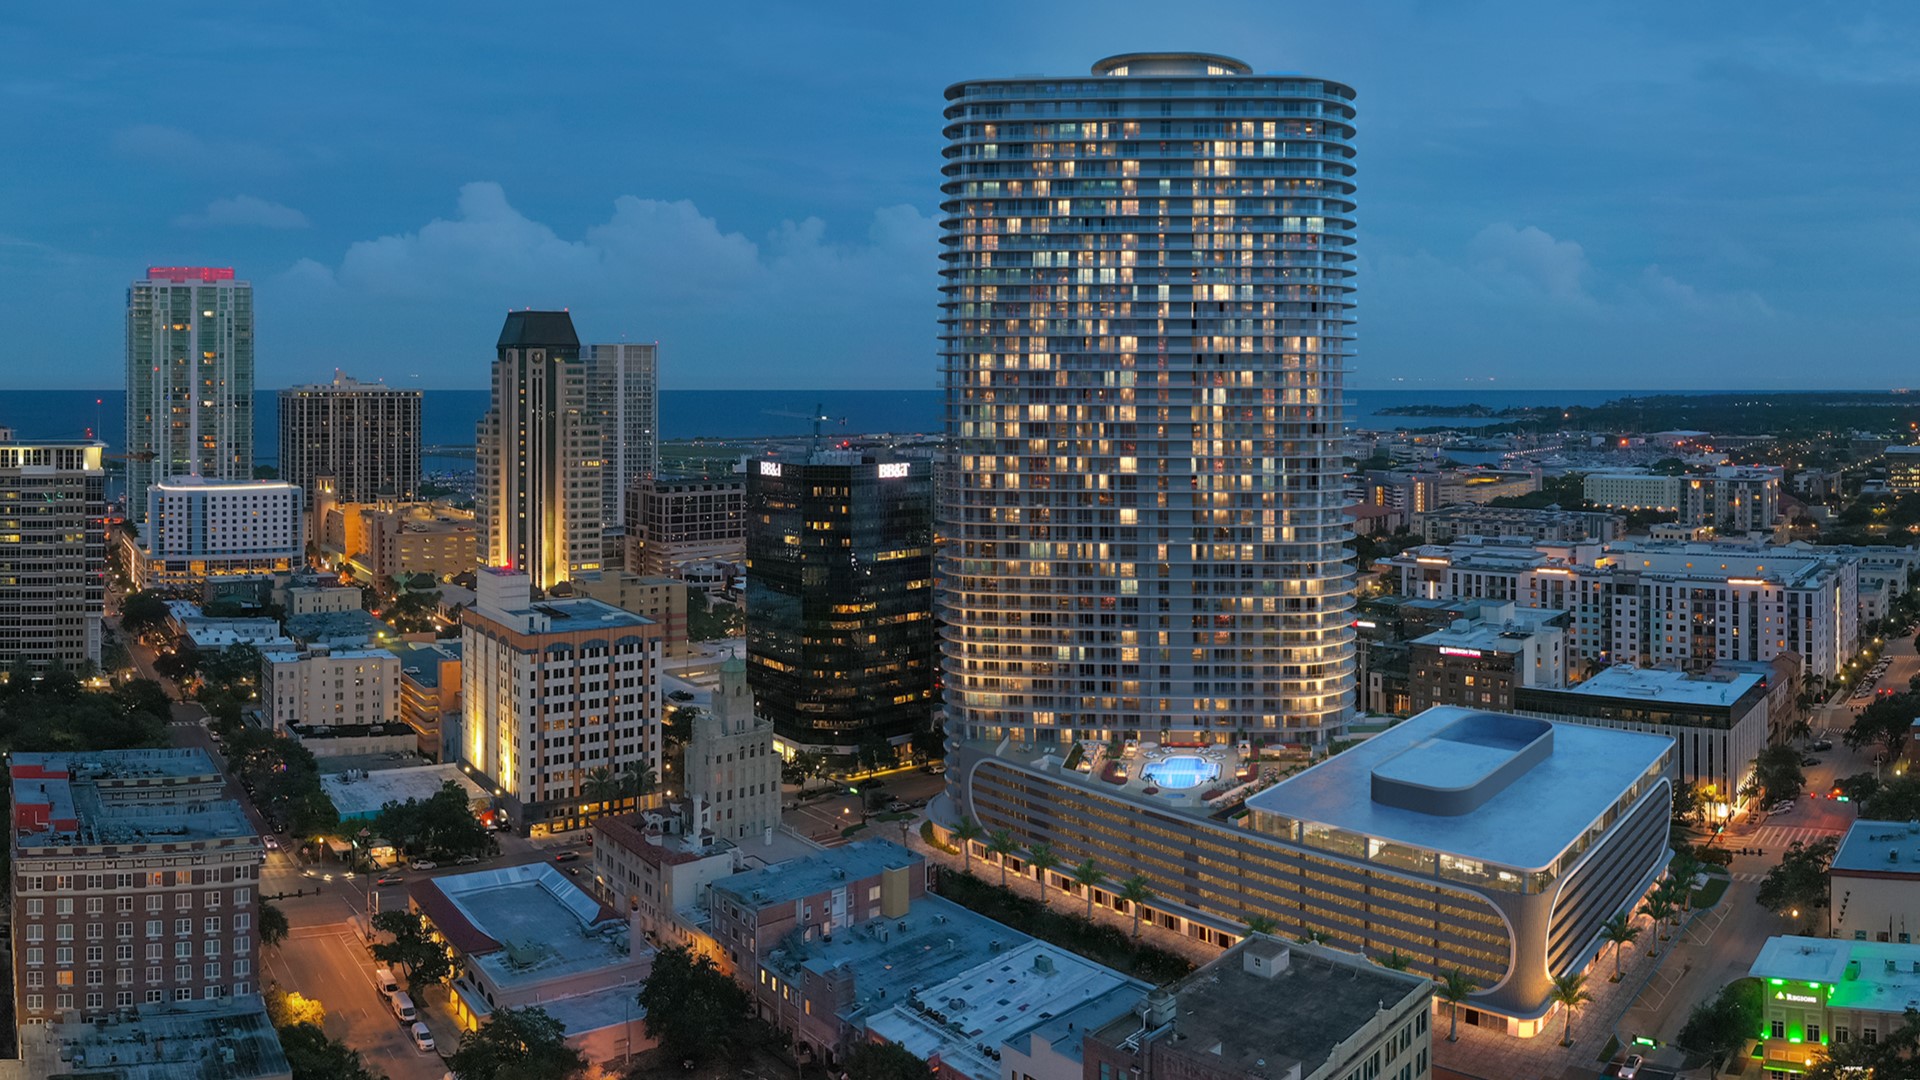 The city of St. Petersburg officially welcomed the city's newest high-rise development to the downtown St. Pete area.